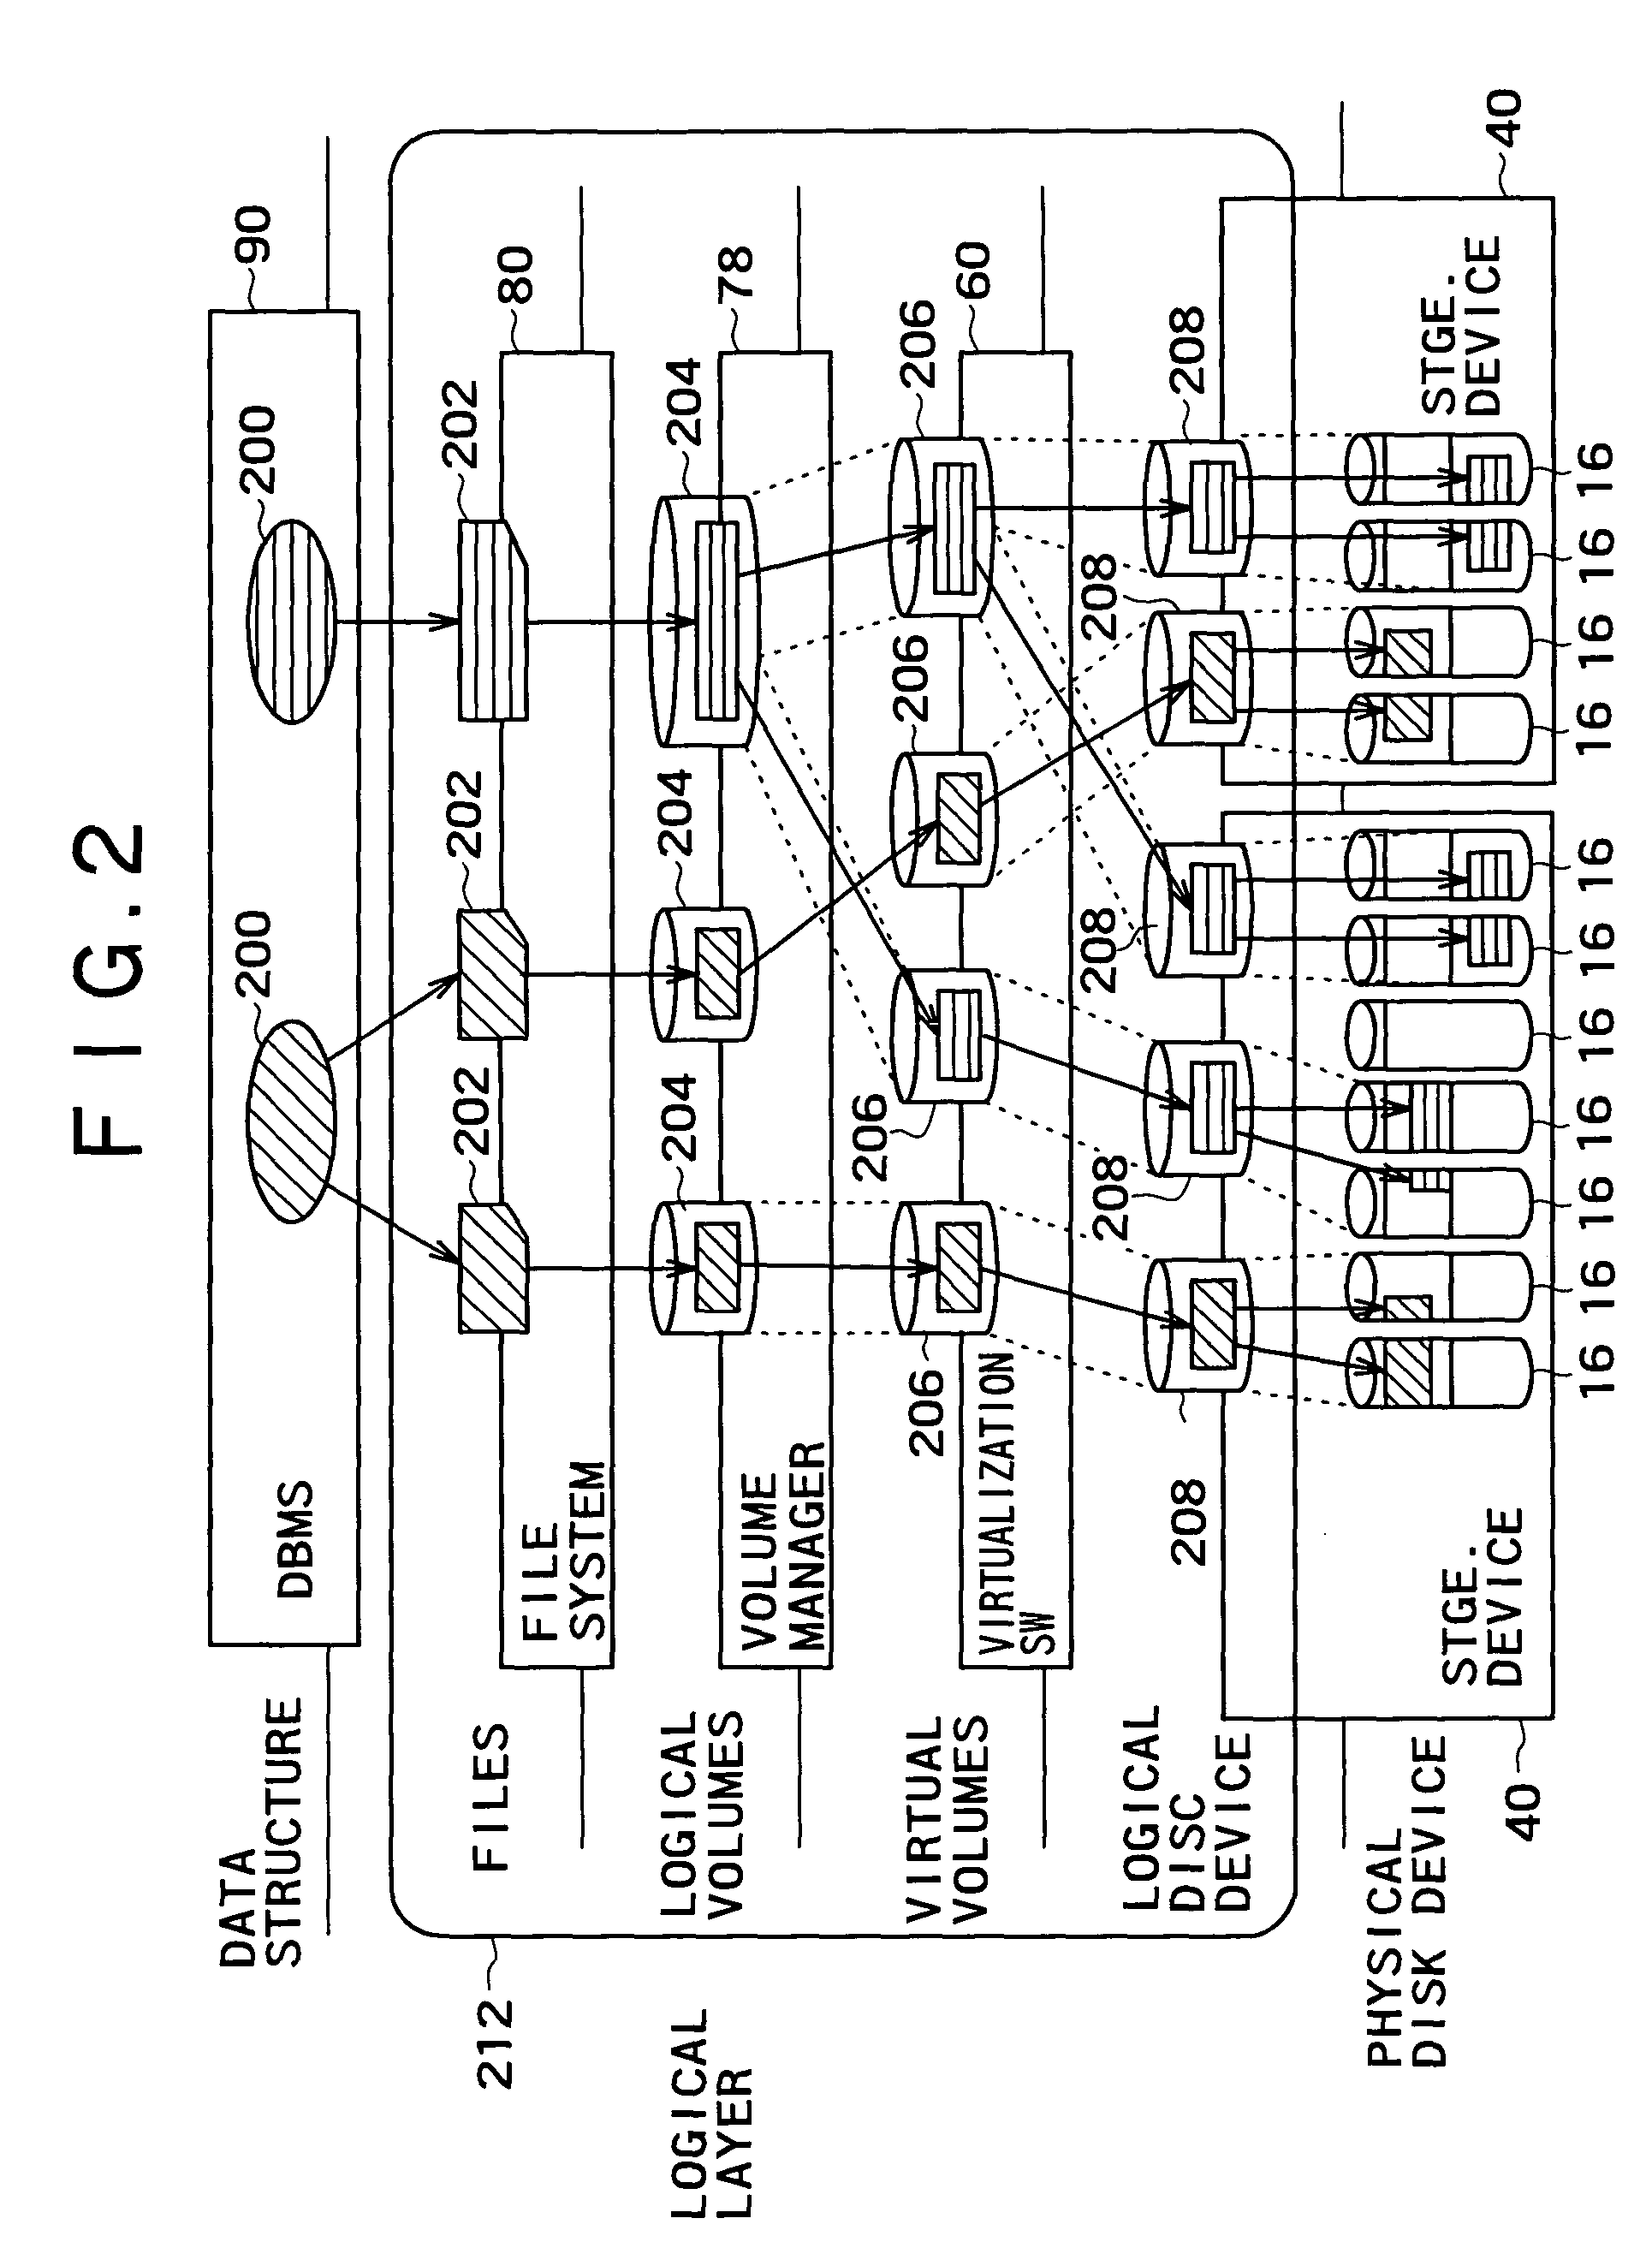 Cache management method for storage device